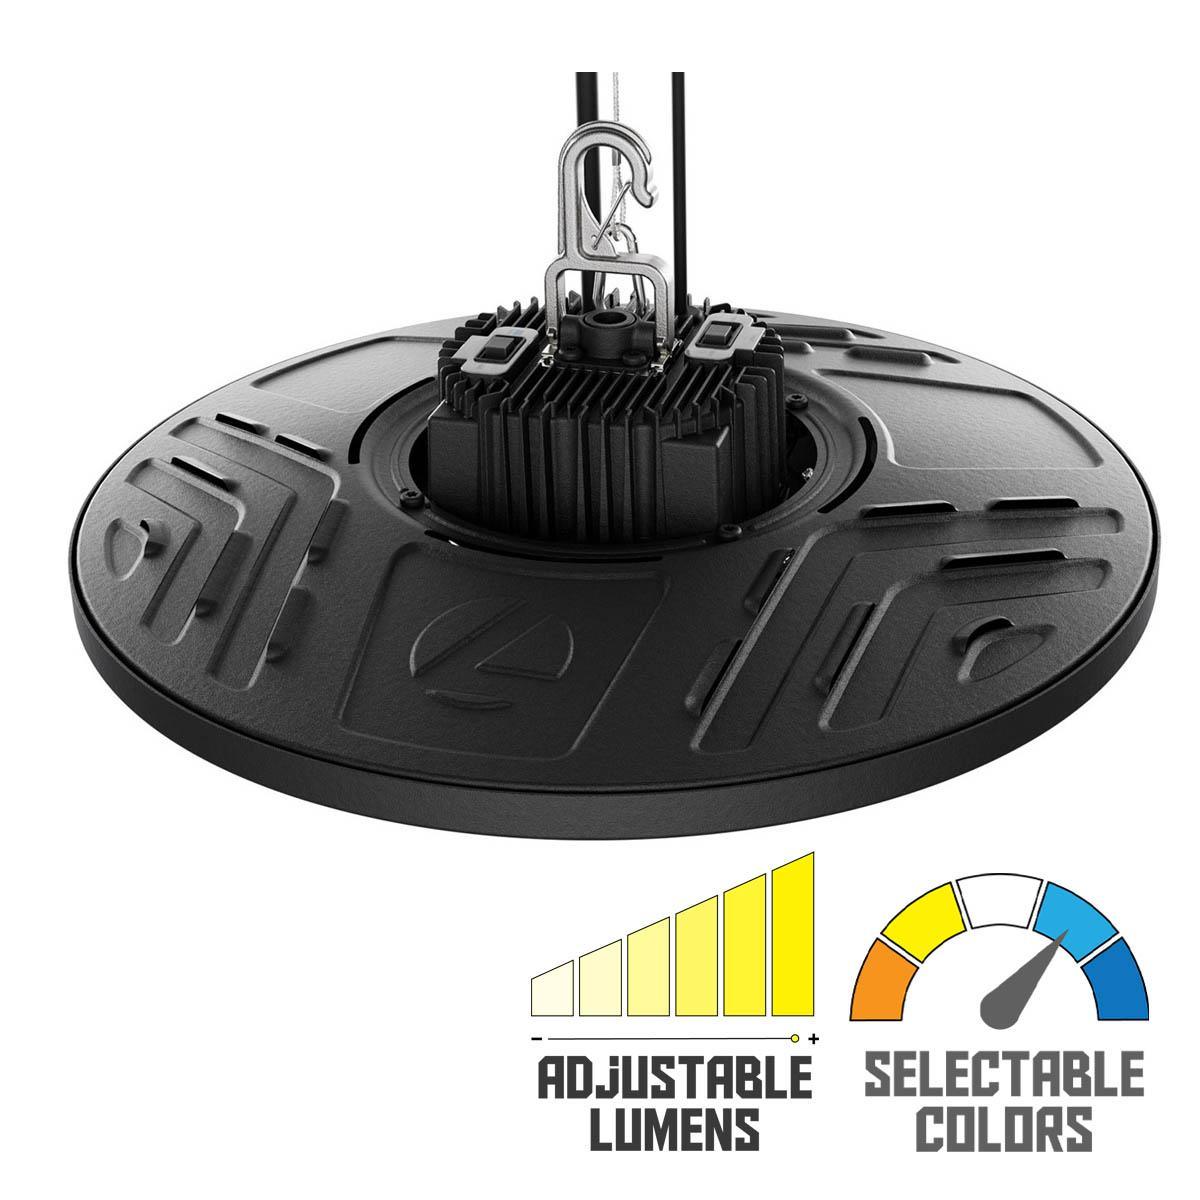 Compact Pro Industrial LED Round High Bay, Selectable 27000 Lumens, 4000K/5000K CCT, 120-347V, Black